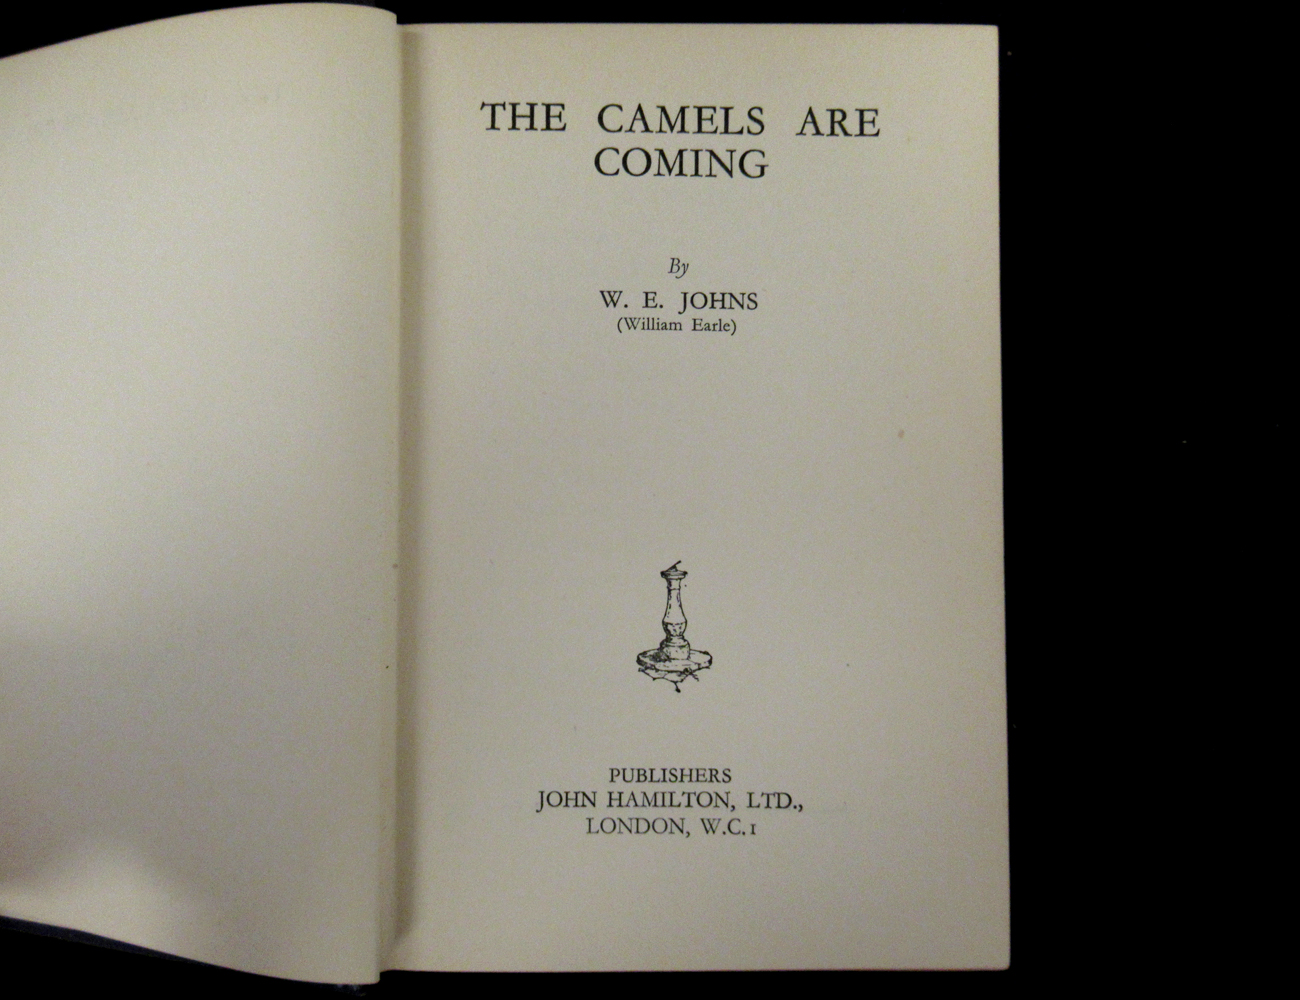 W E JOHNS (WILLIAM EARLE): THE CAMELS ARE COMING, London, John Hamilton Ltd [1933], 1st edition, 3rd